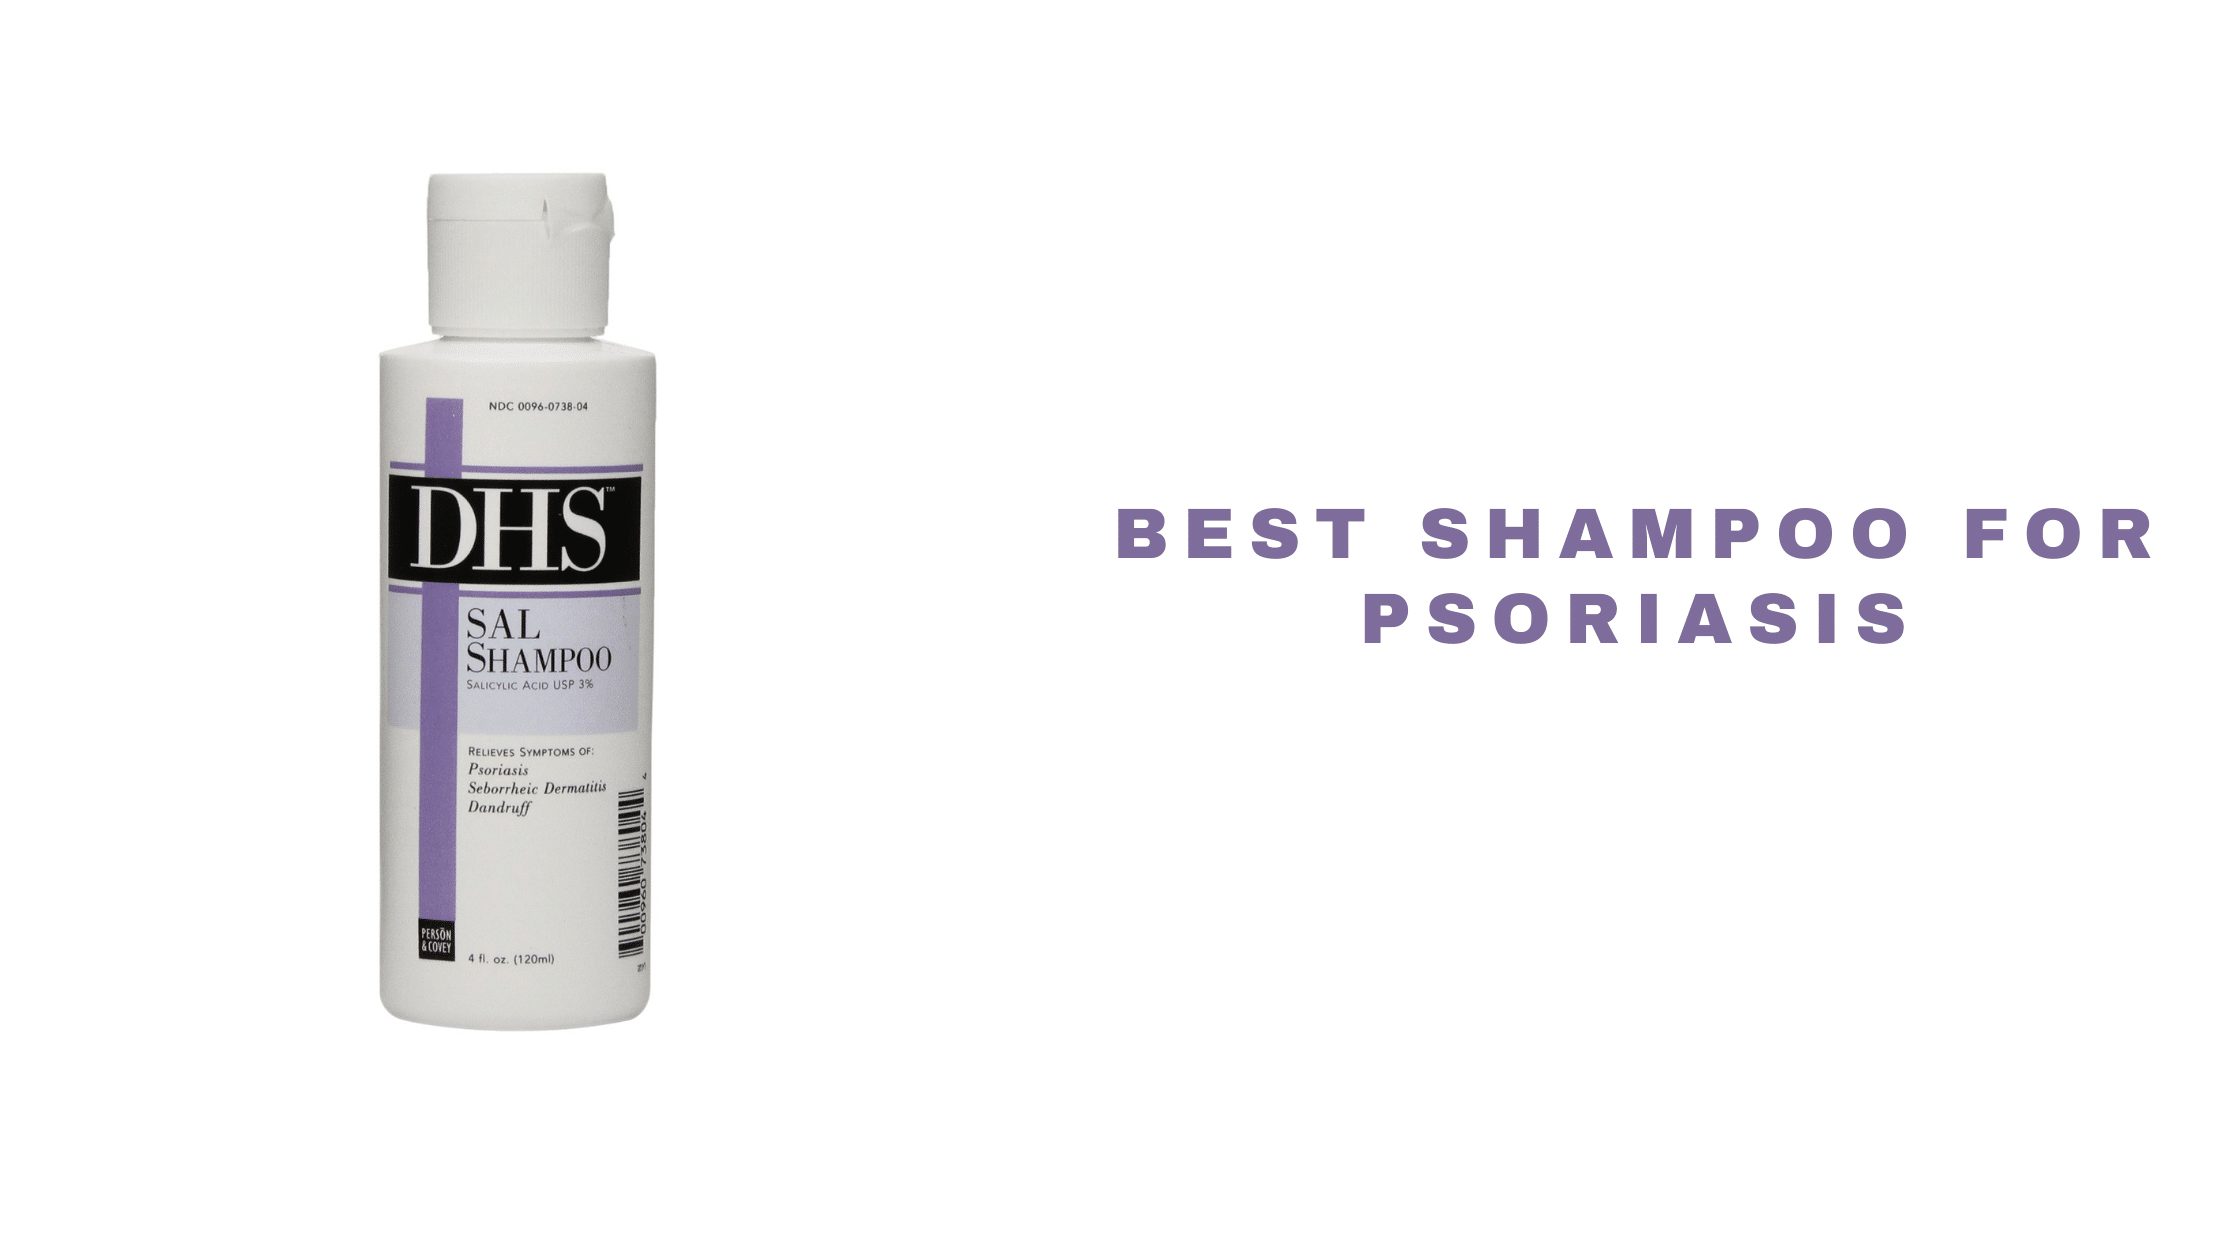 10 Best Shampoo For Psoriasis 2021